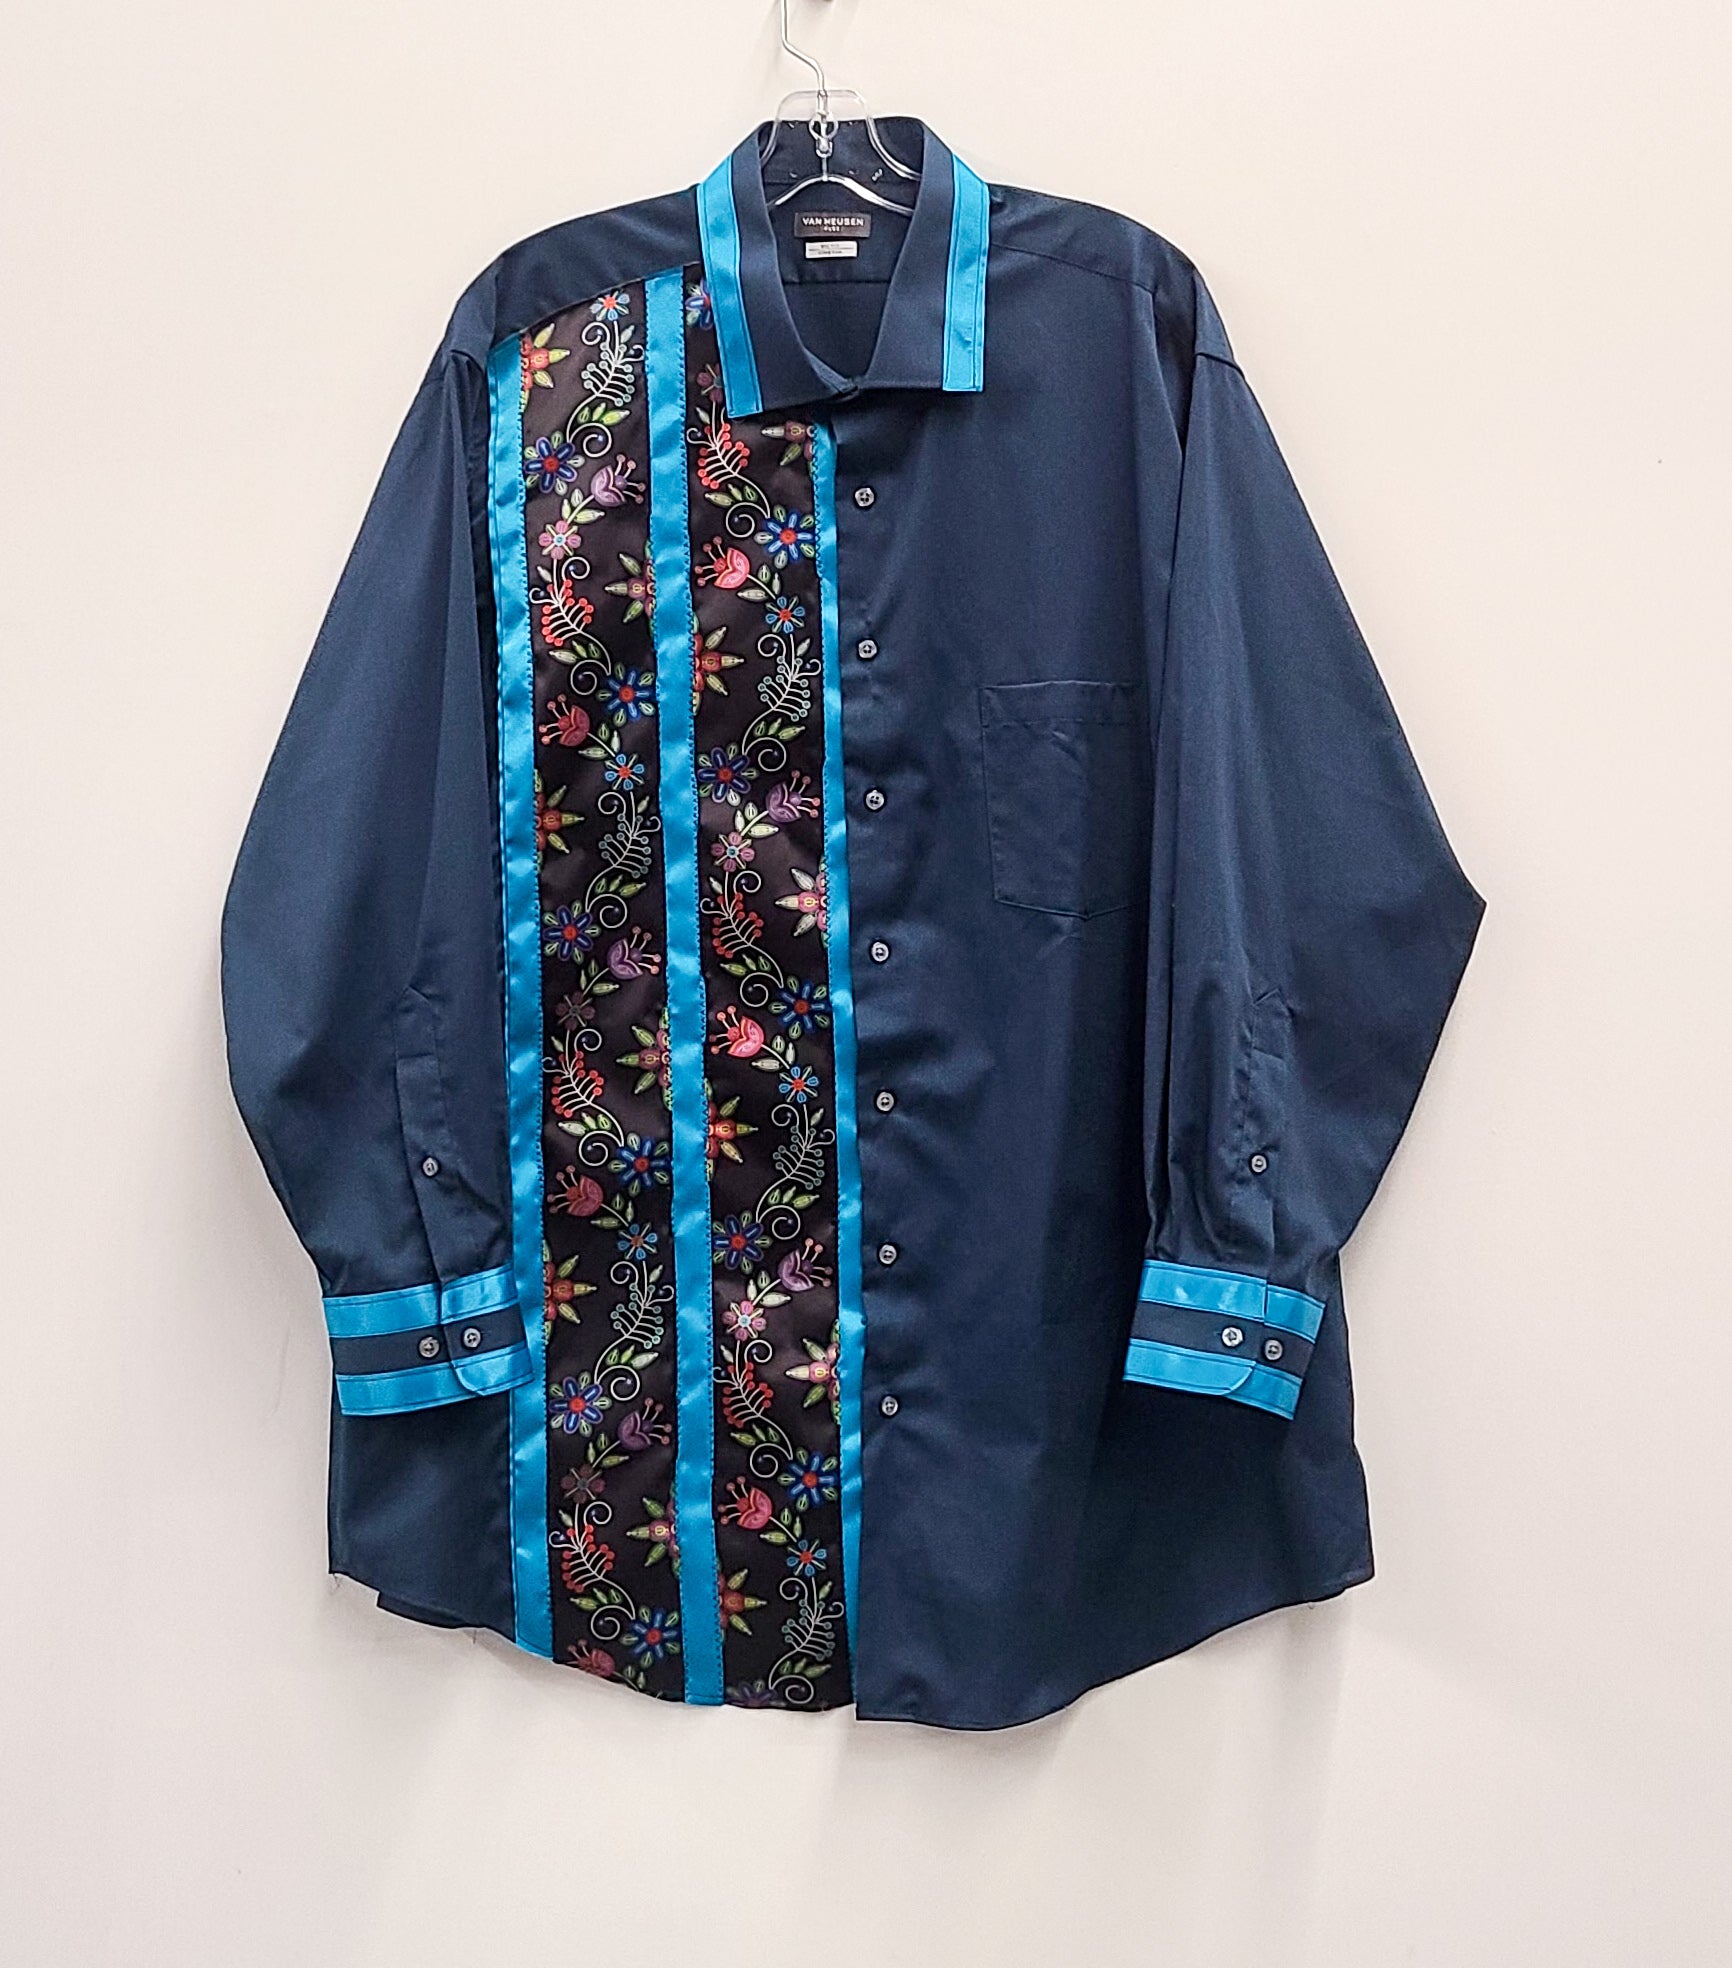 Long Sleeve Button-up Shirts with Ribbon and Heat Transfers